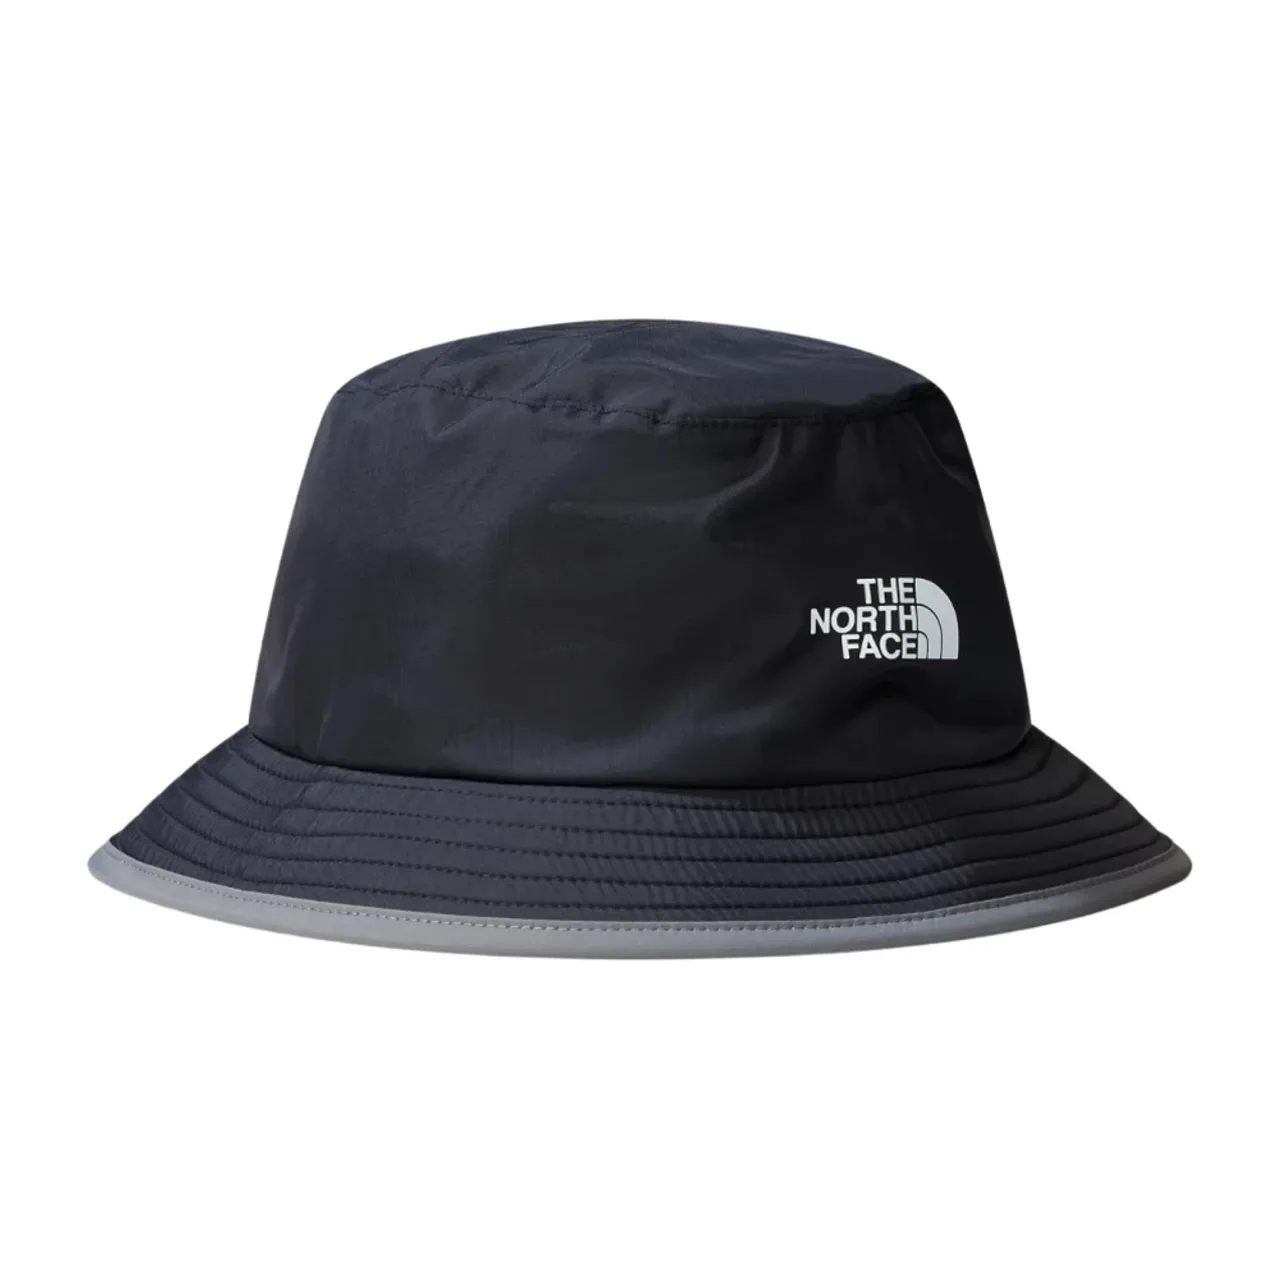 The North Face - Accessories 